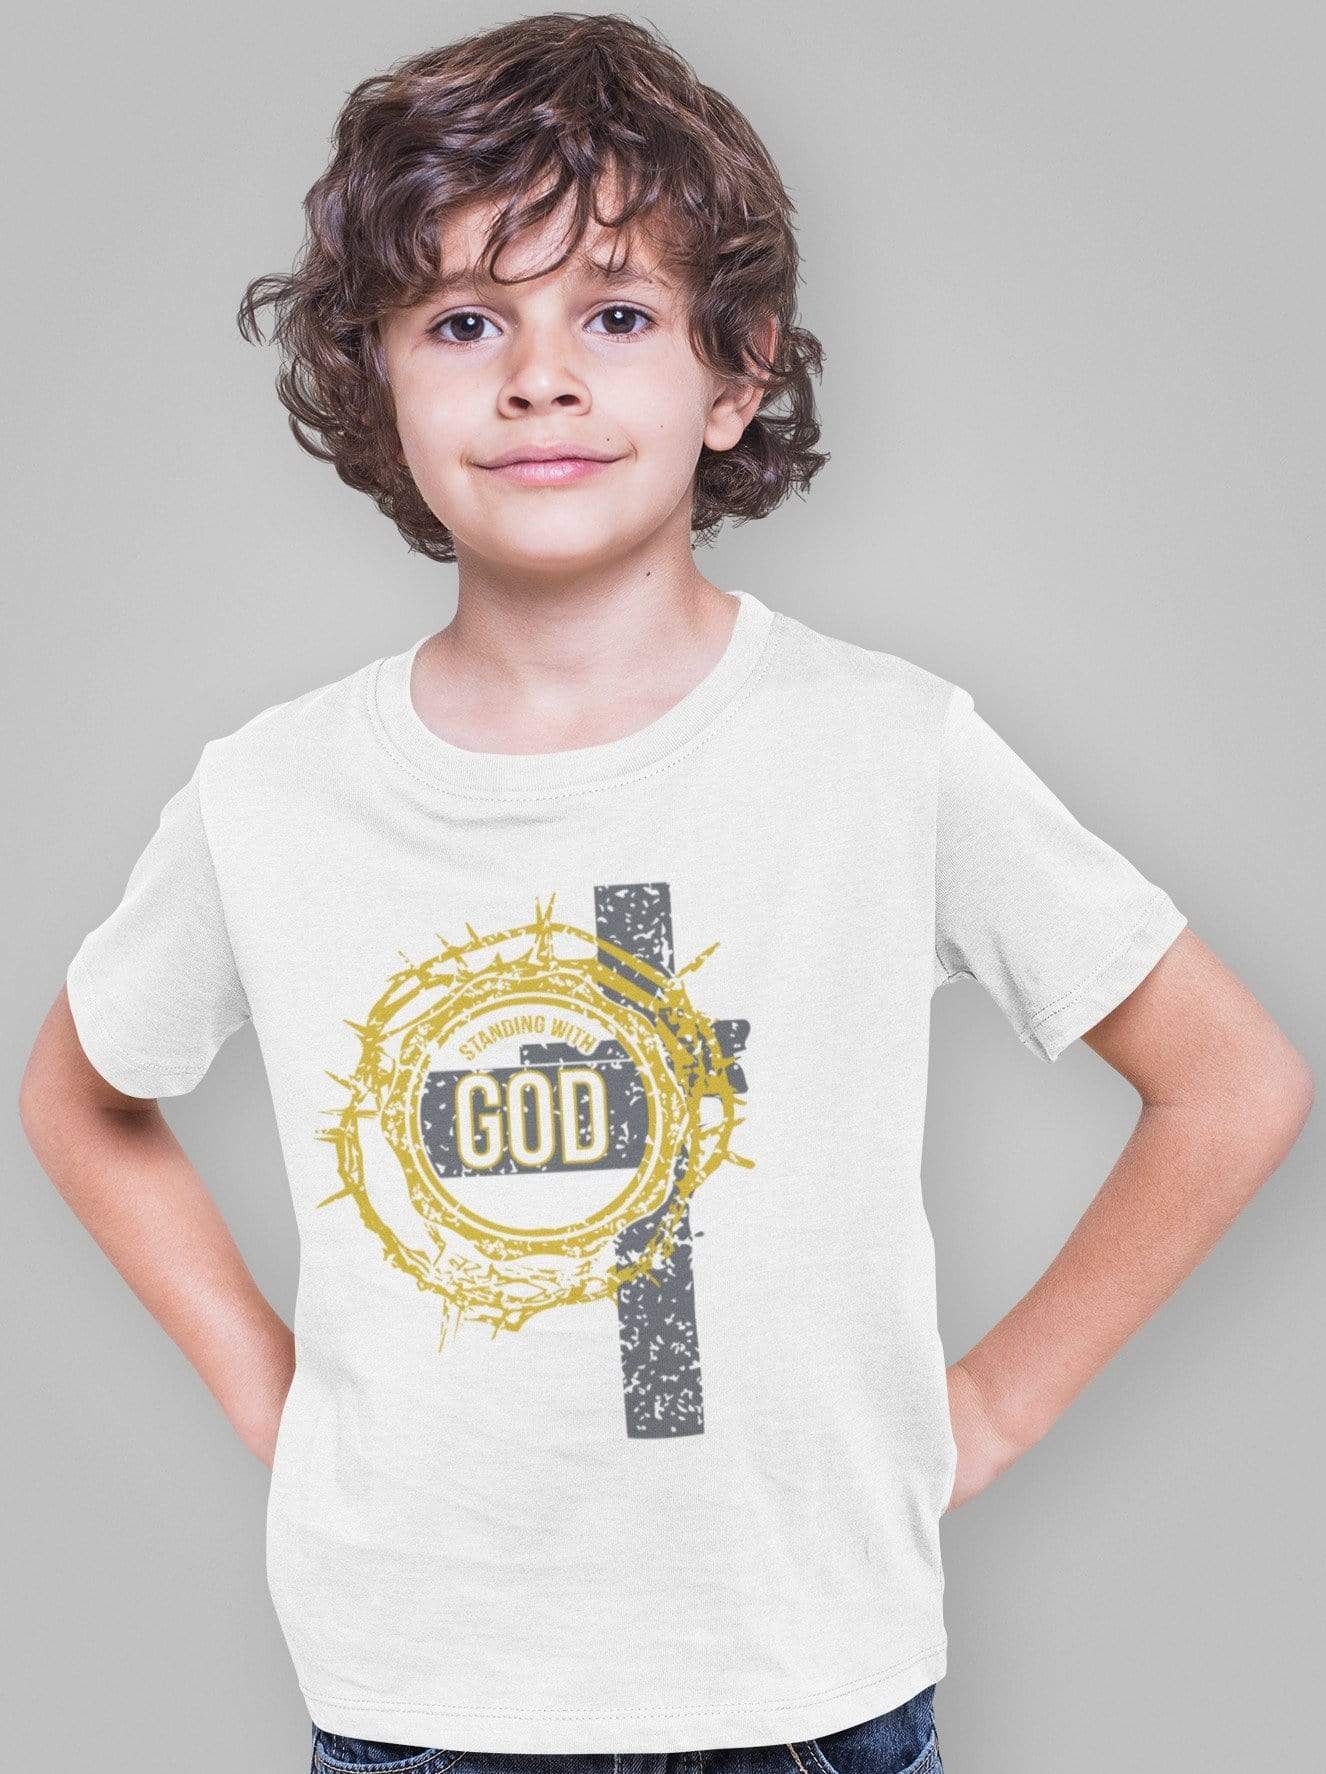 Living Words Kids Round Neck T Shirt Boy / 0-12 Mn / White Standing with God